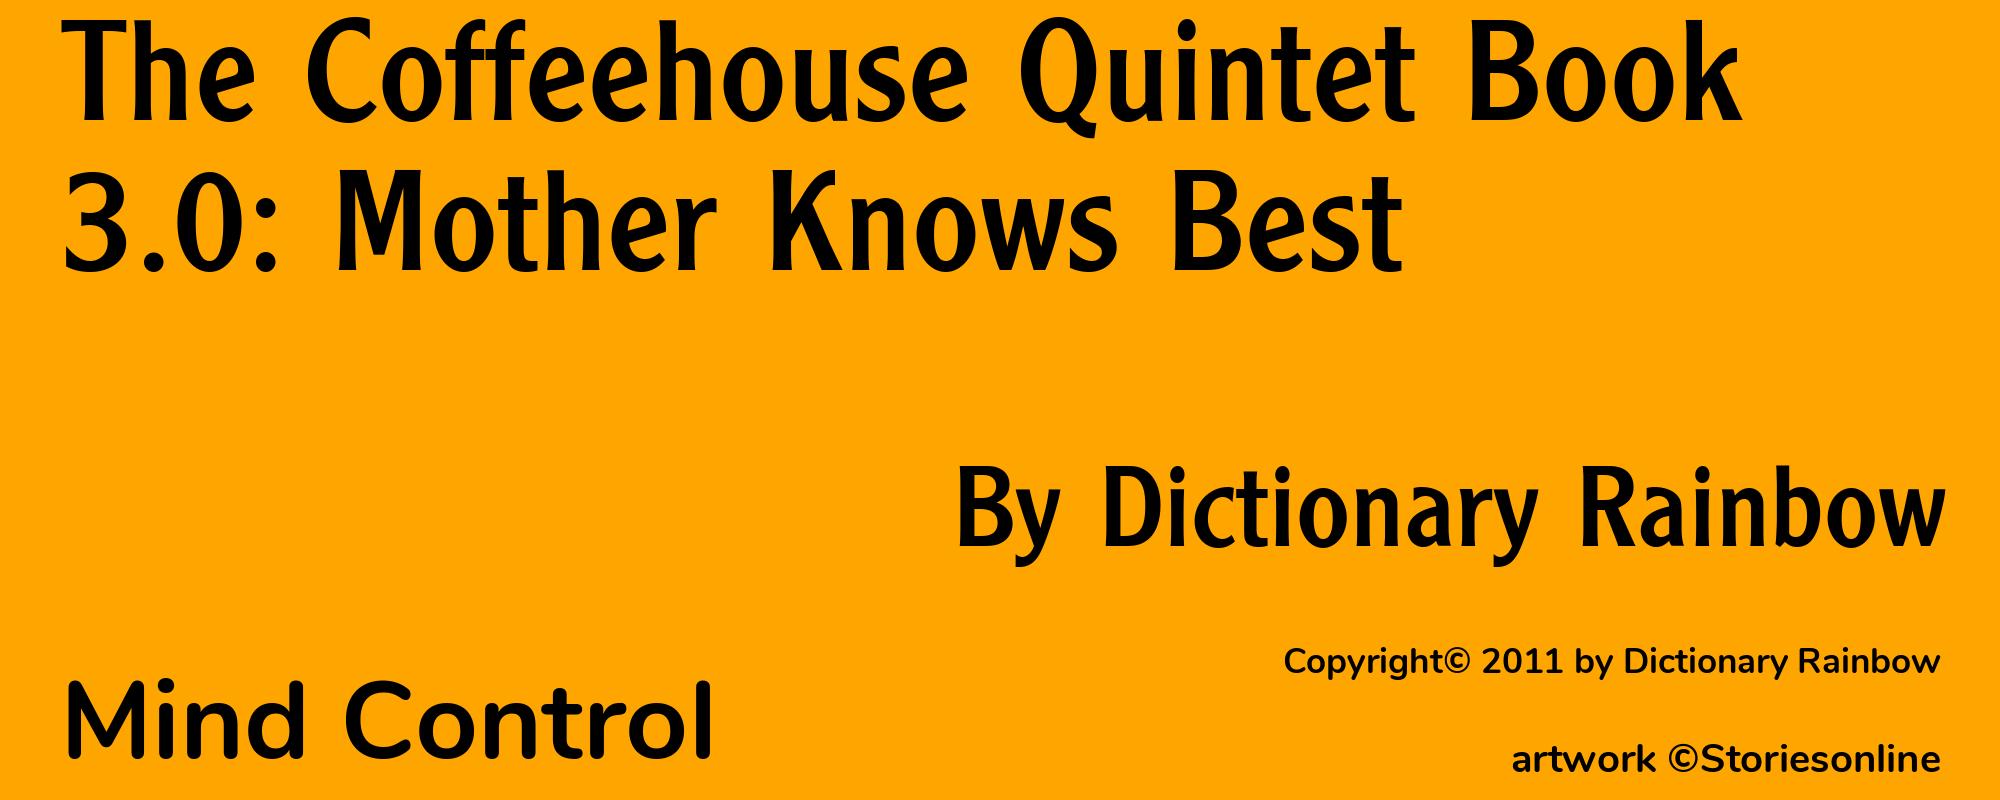 The Coffeehouse Quintet Book 3.0: Mother Knows Best - Cover